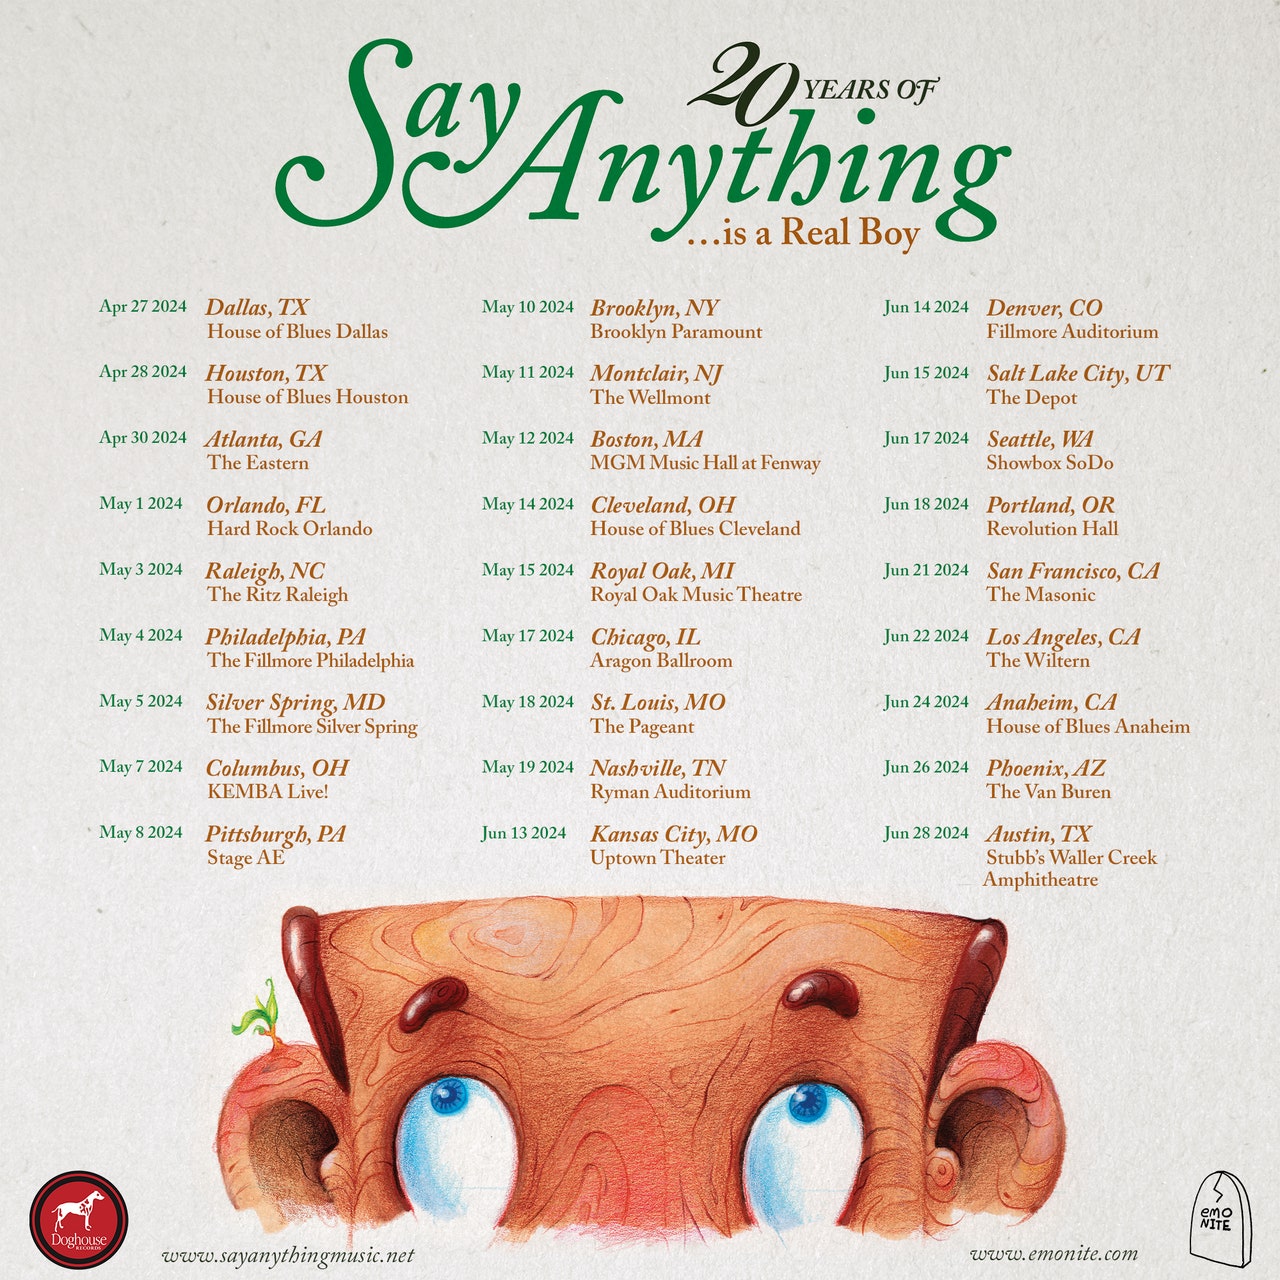 Say Anything - Is A Real Boy 20th Anniversary Tour in der Fillmore Auditorium Denver Tickets